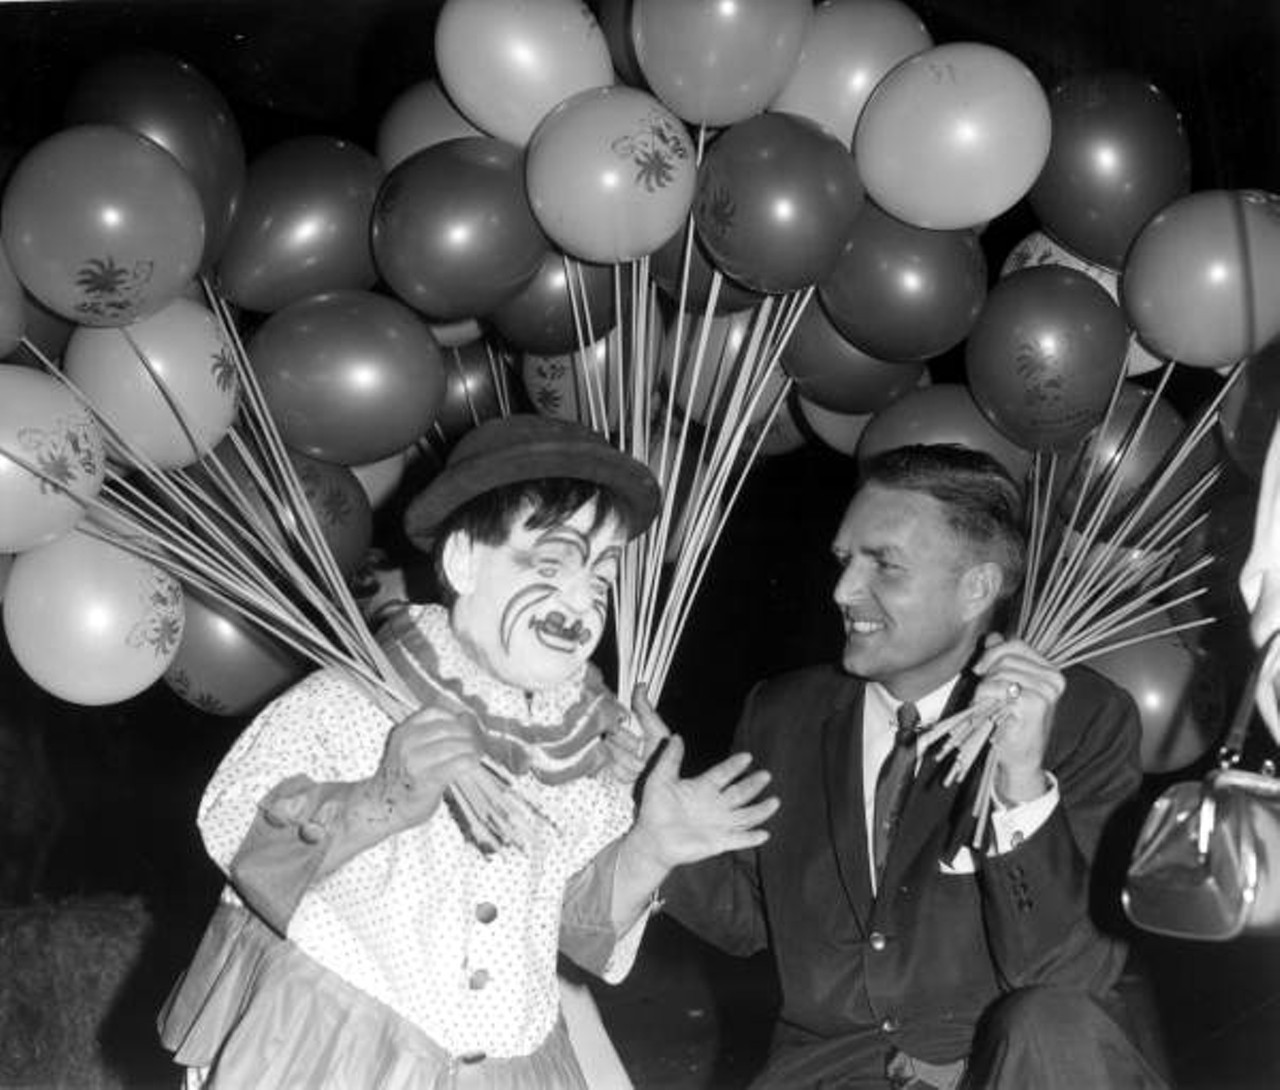 Another short clown with balloons and a state official (via floridamemory.com)